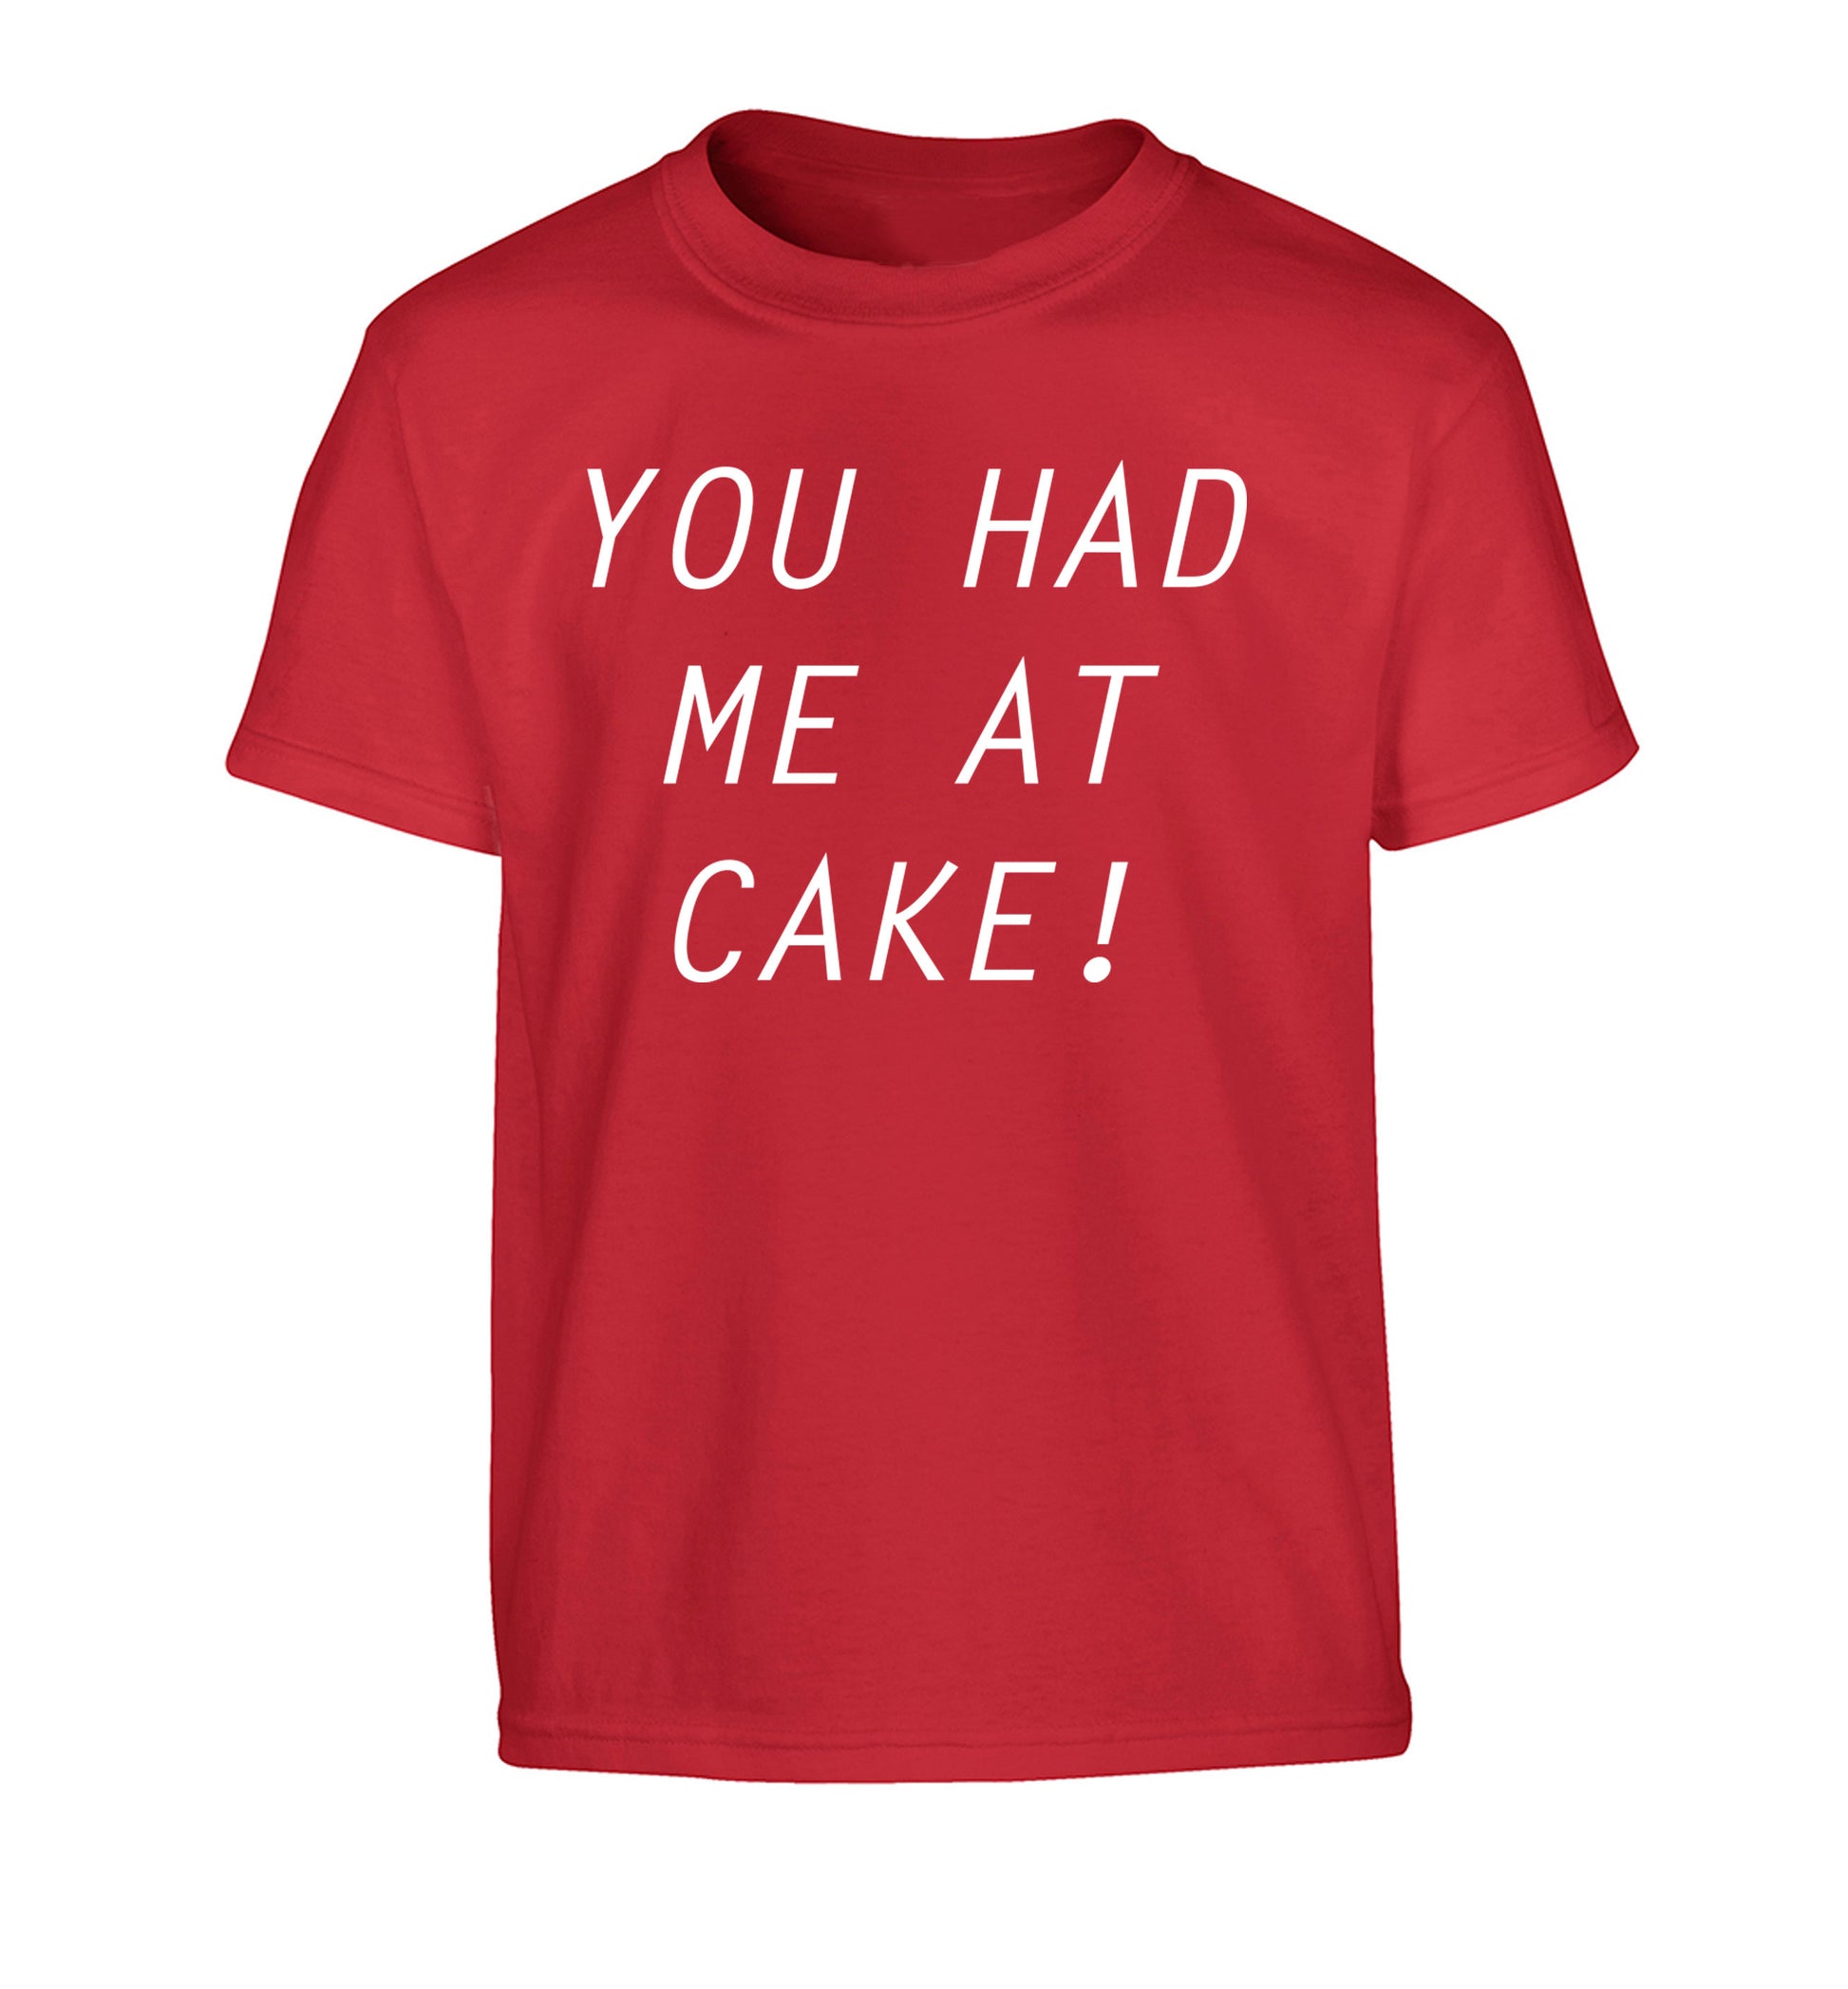 You had me at cake Children's red Tshirt 12-14 Years